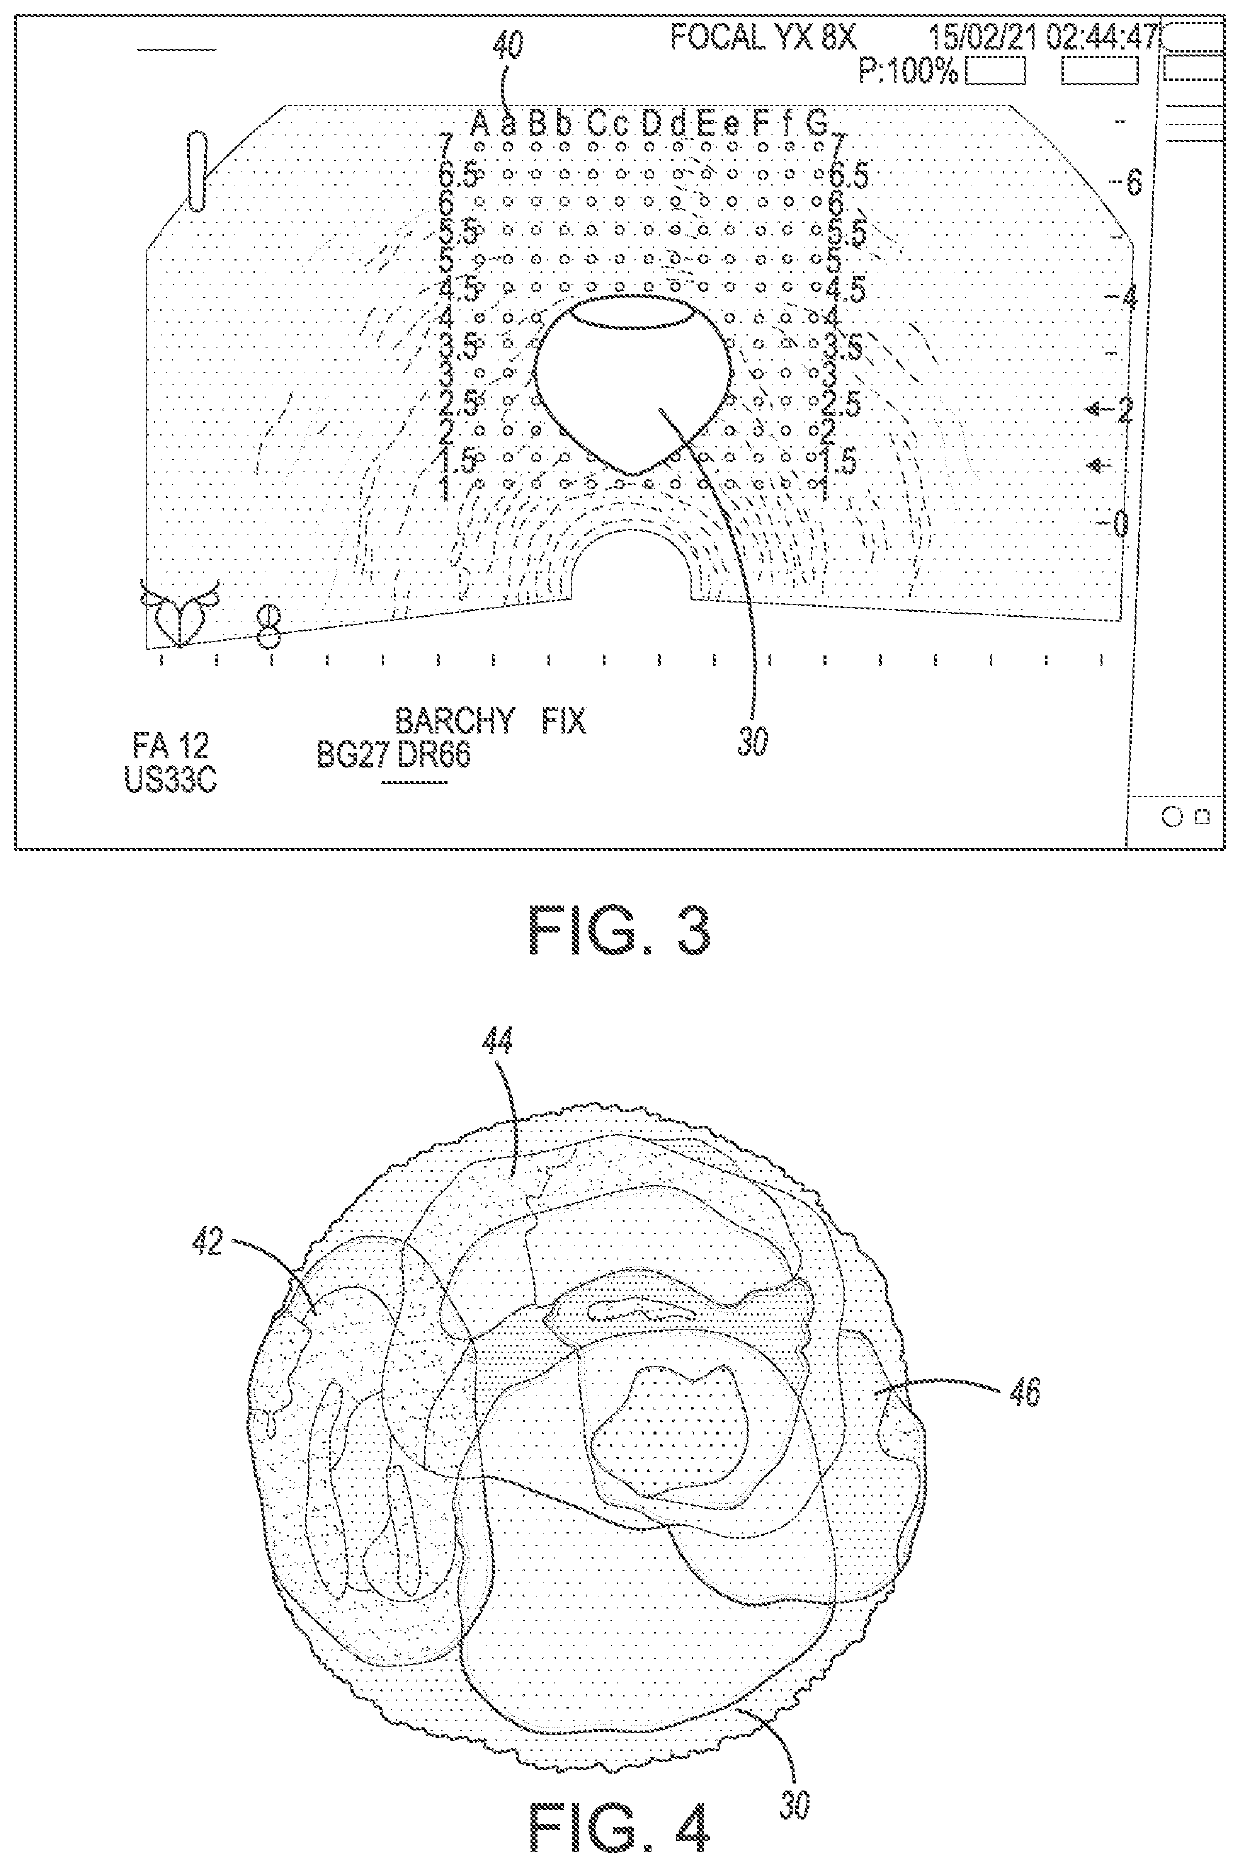 System and method for prostate treatment under local anesthesia